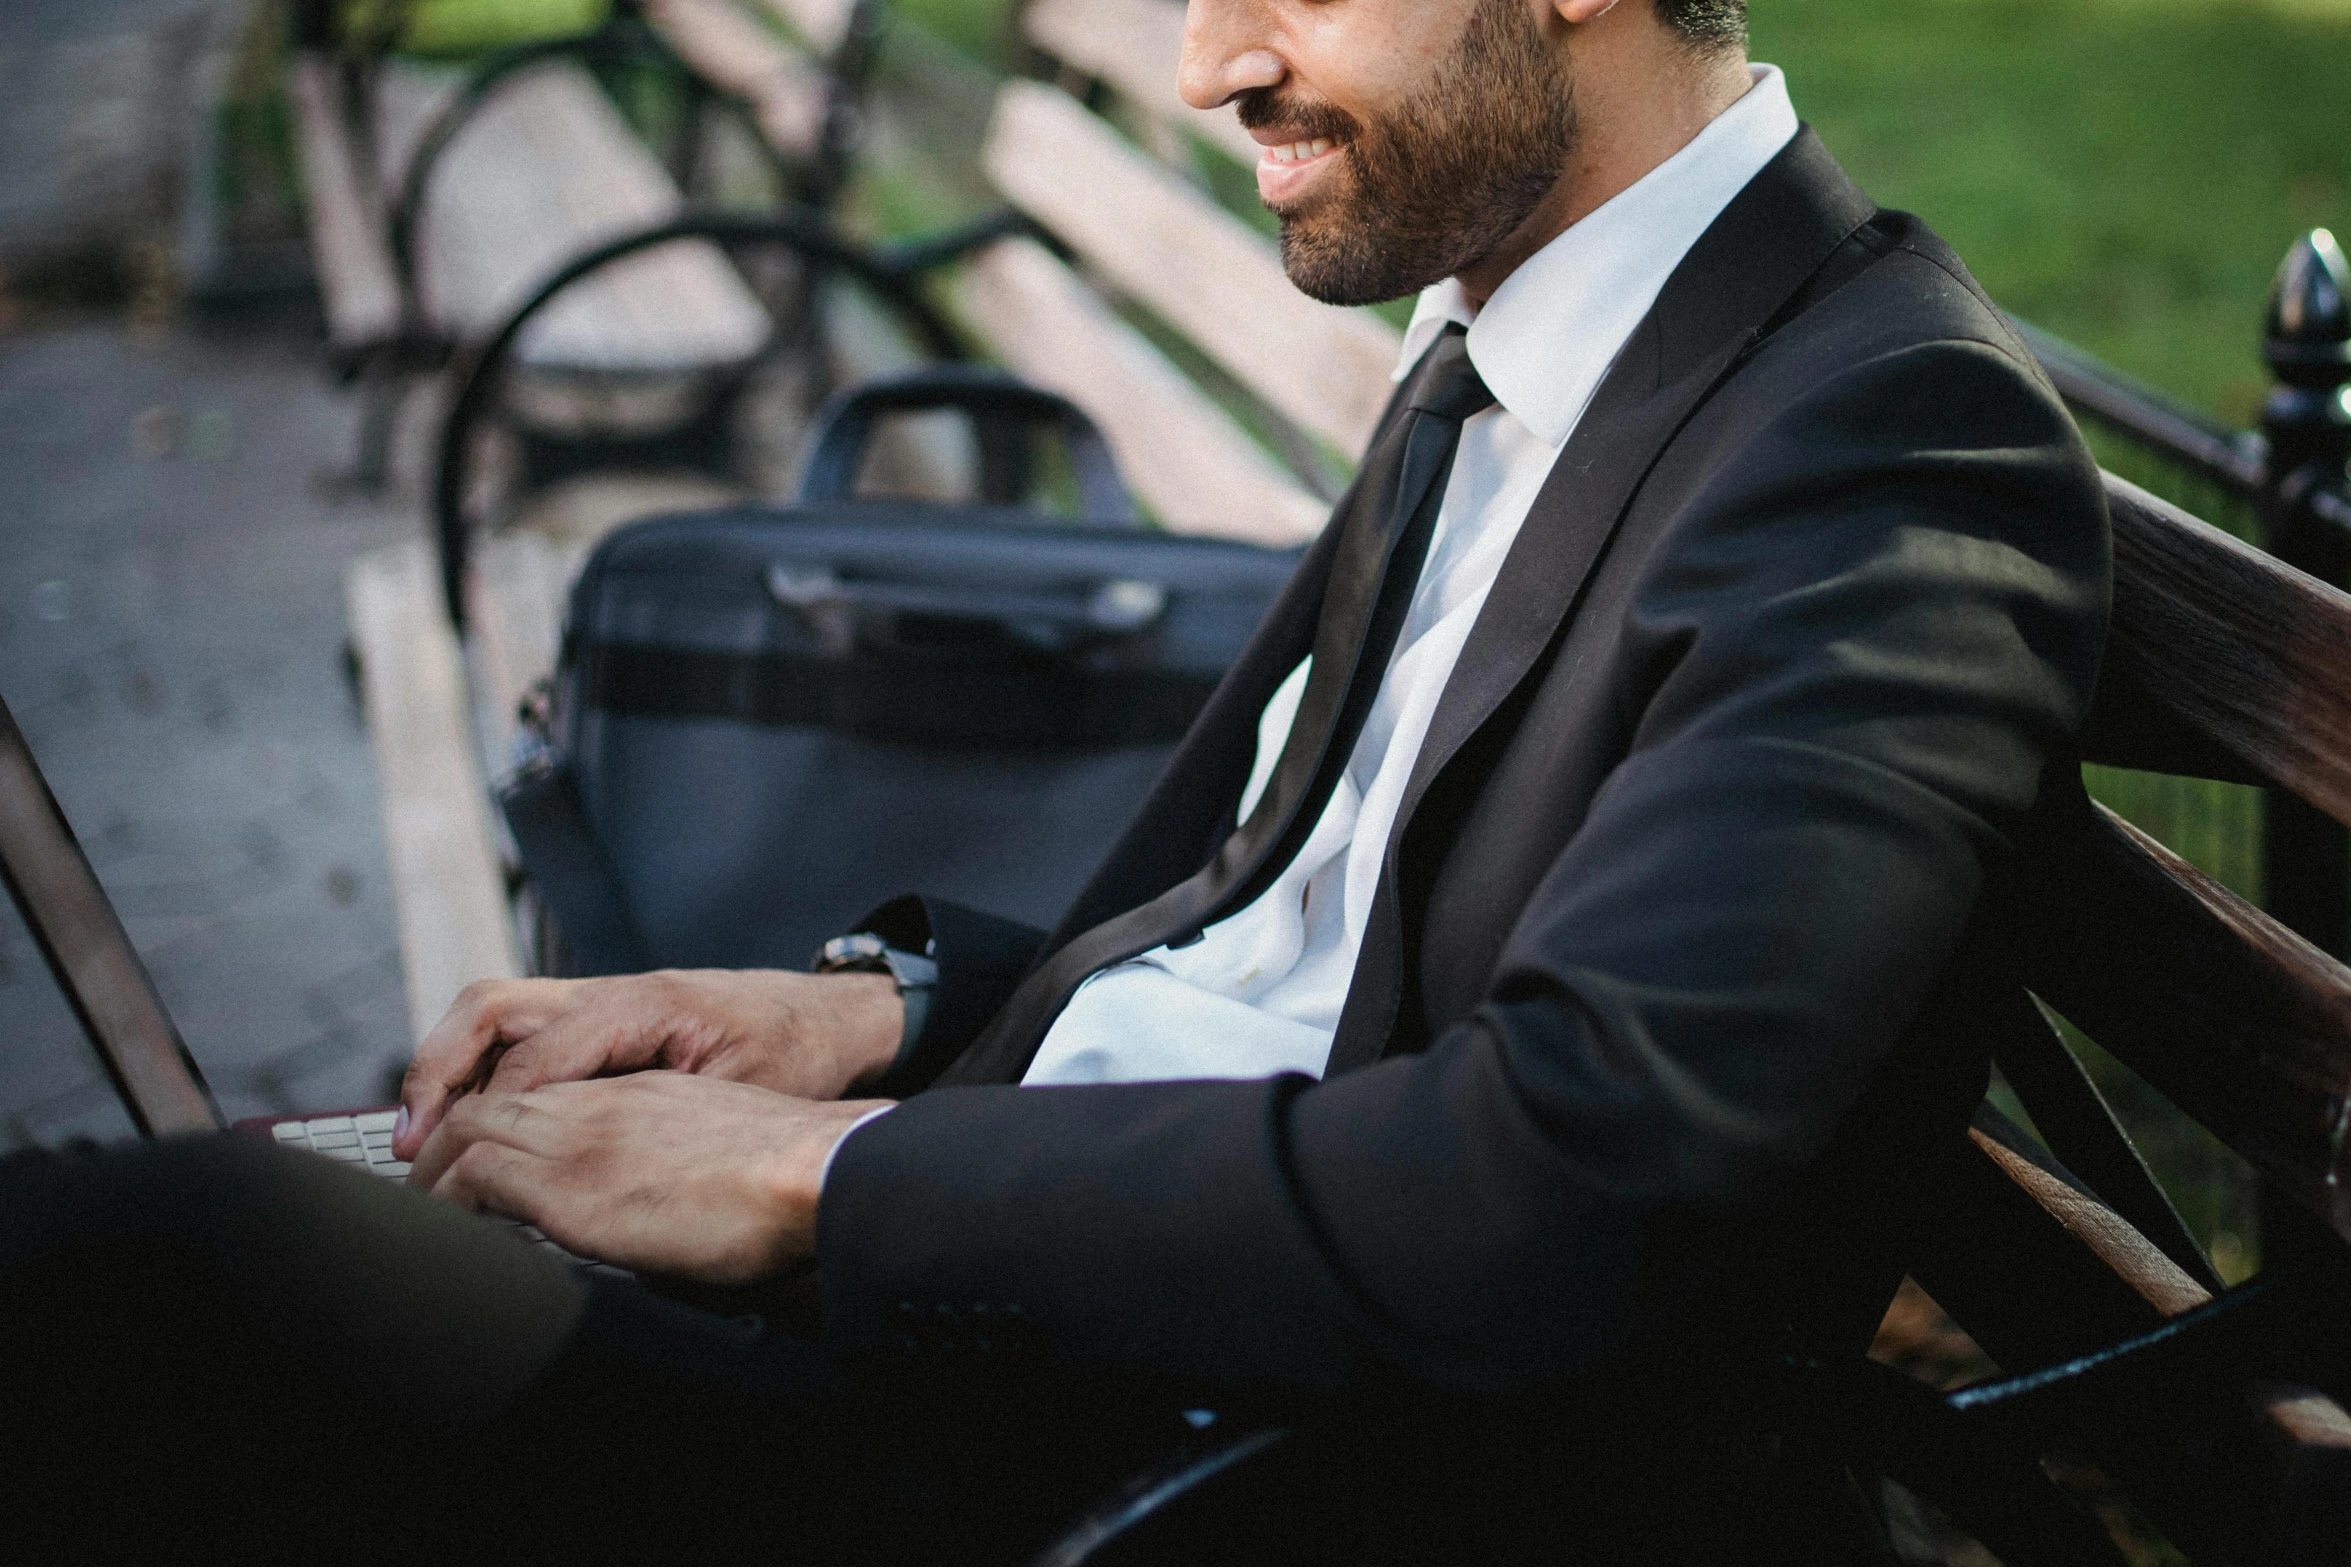 a man sitting on a bench using a laptop, pexels contest winner, black tie, profile image, well trimmed beard, formal wear